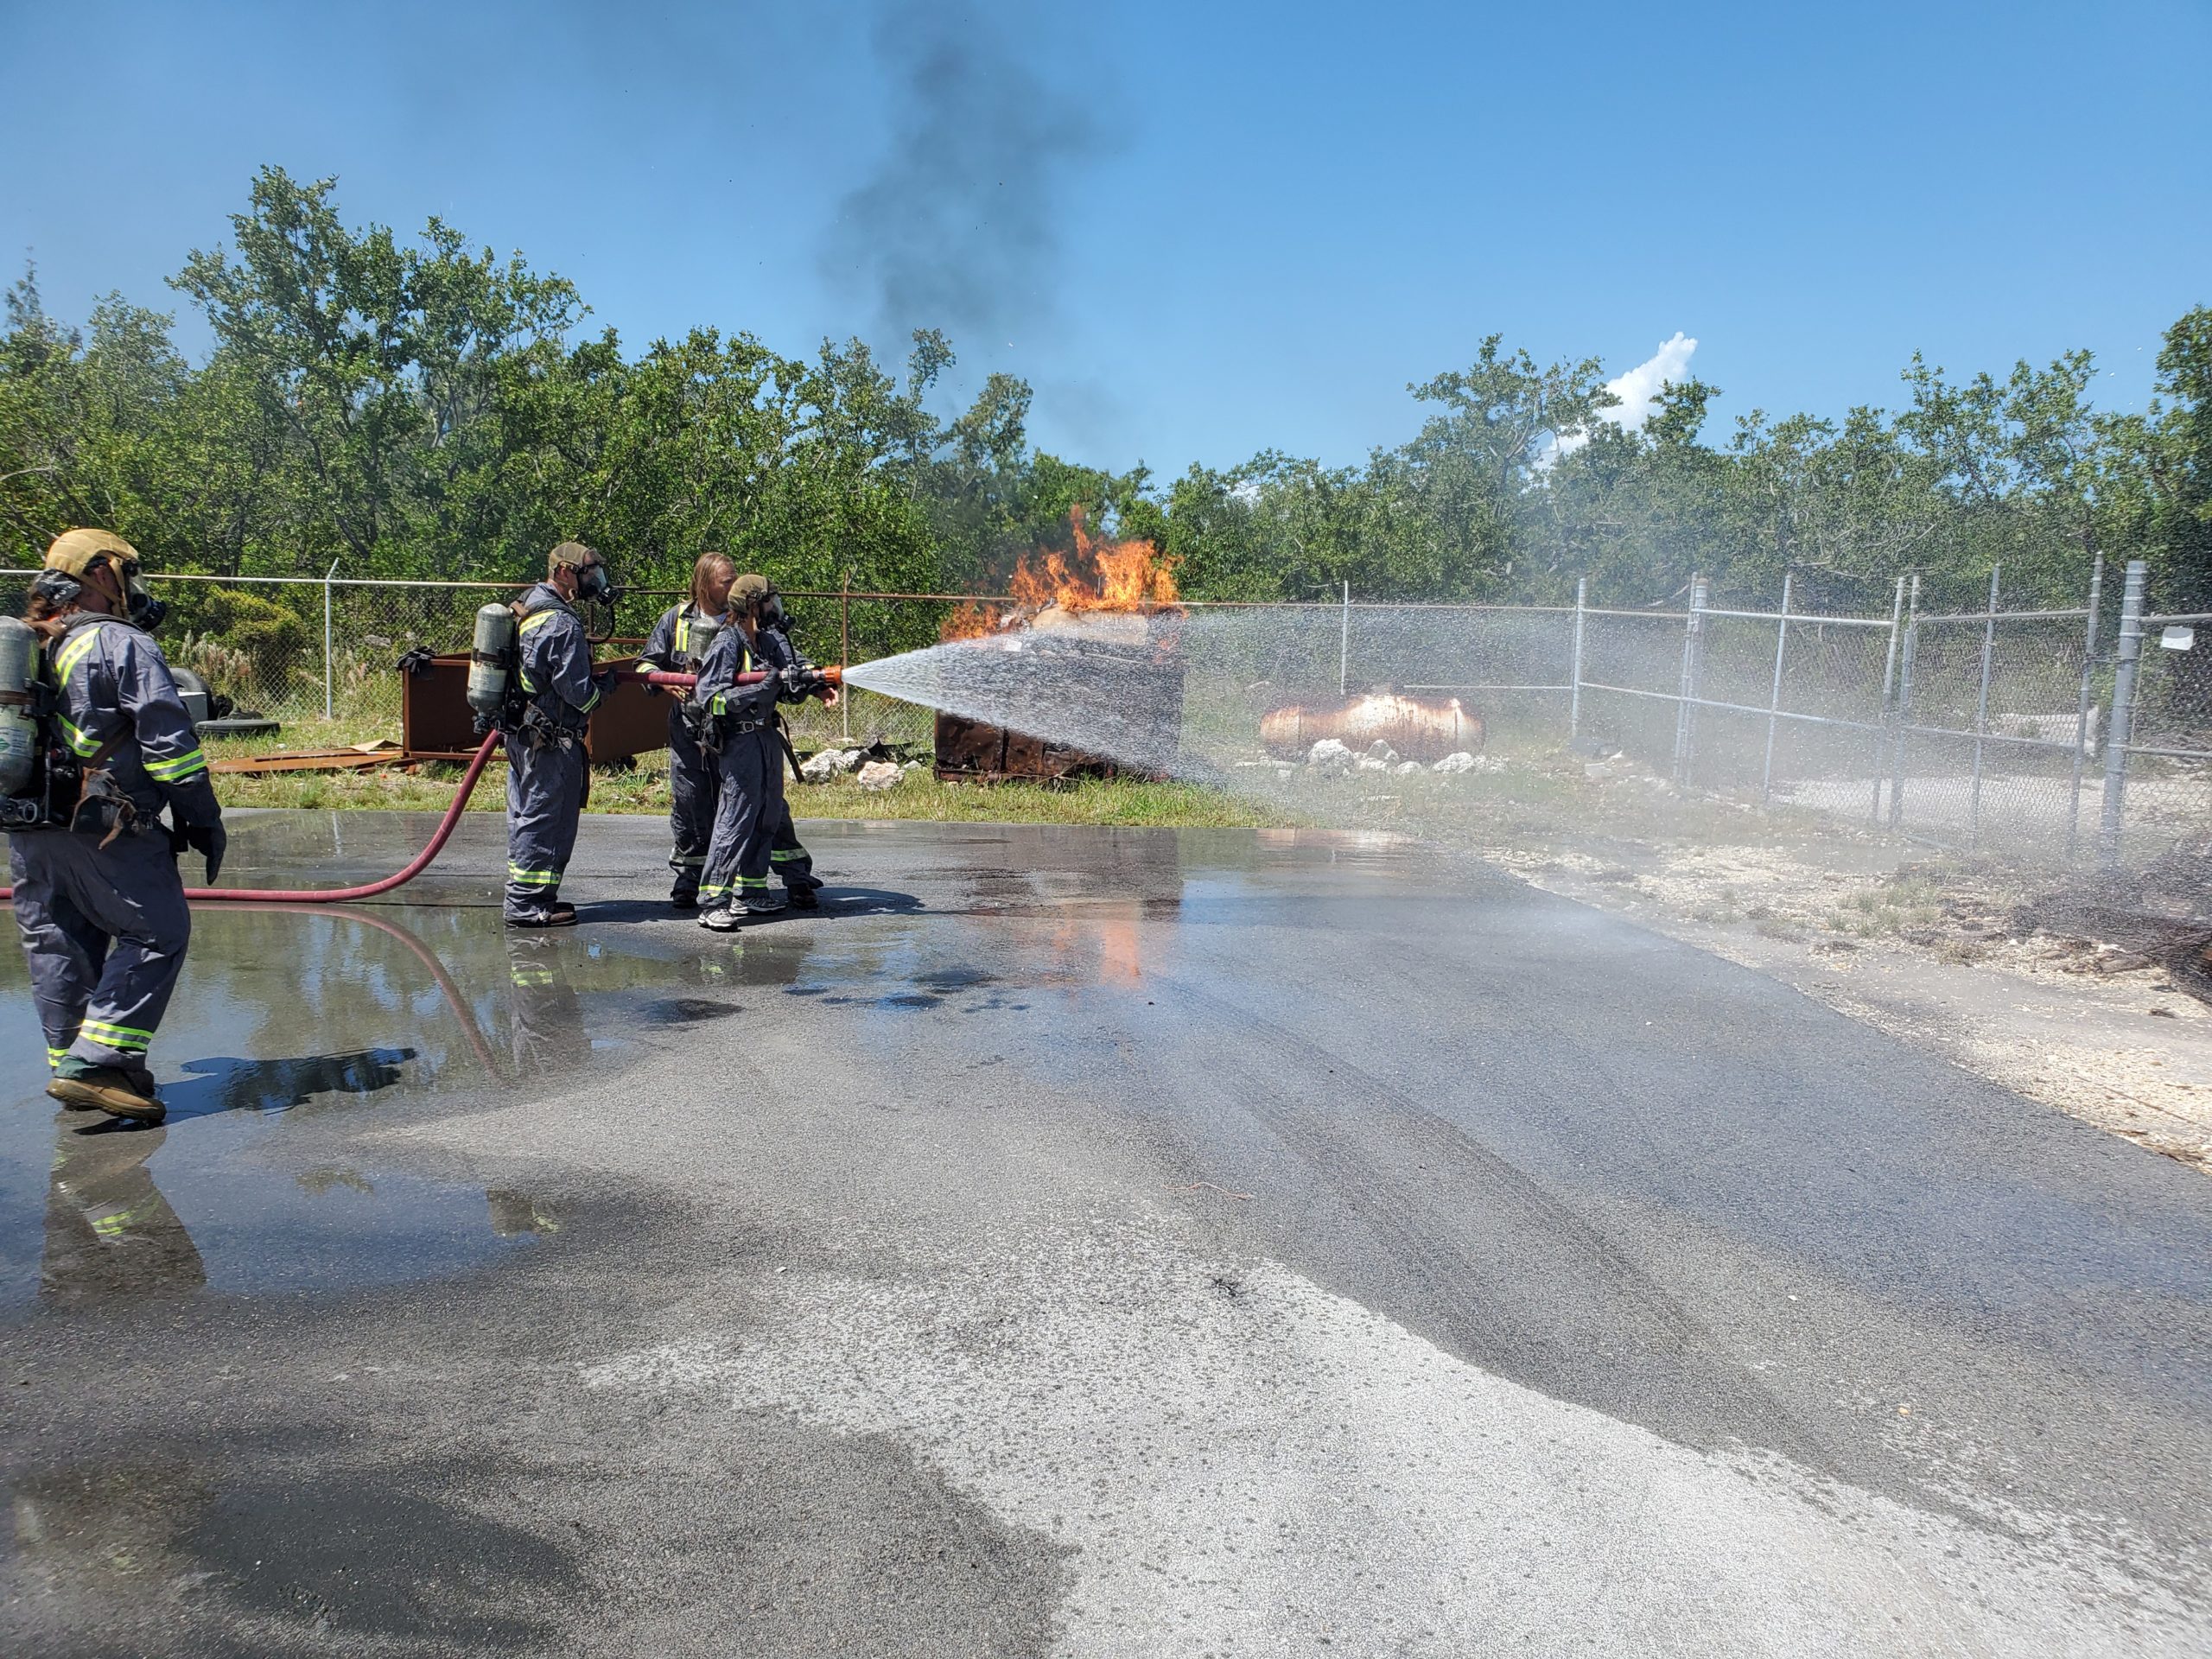 STCW Basic Safety Training (BST) - 5 day and blended - Key West